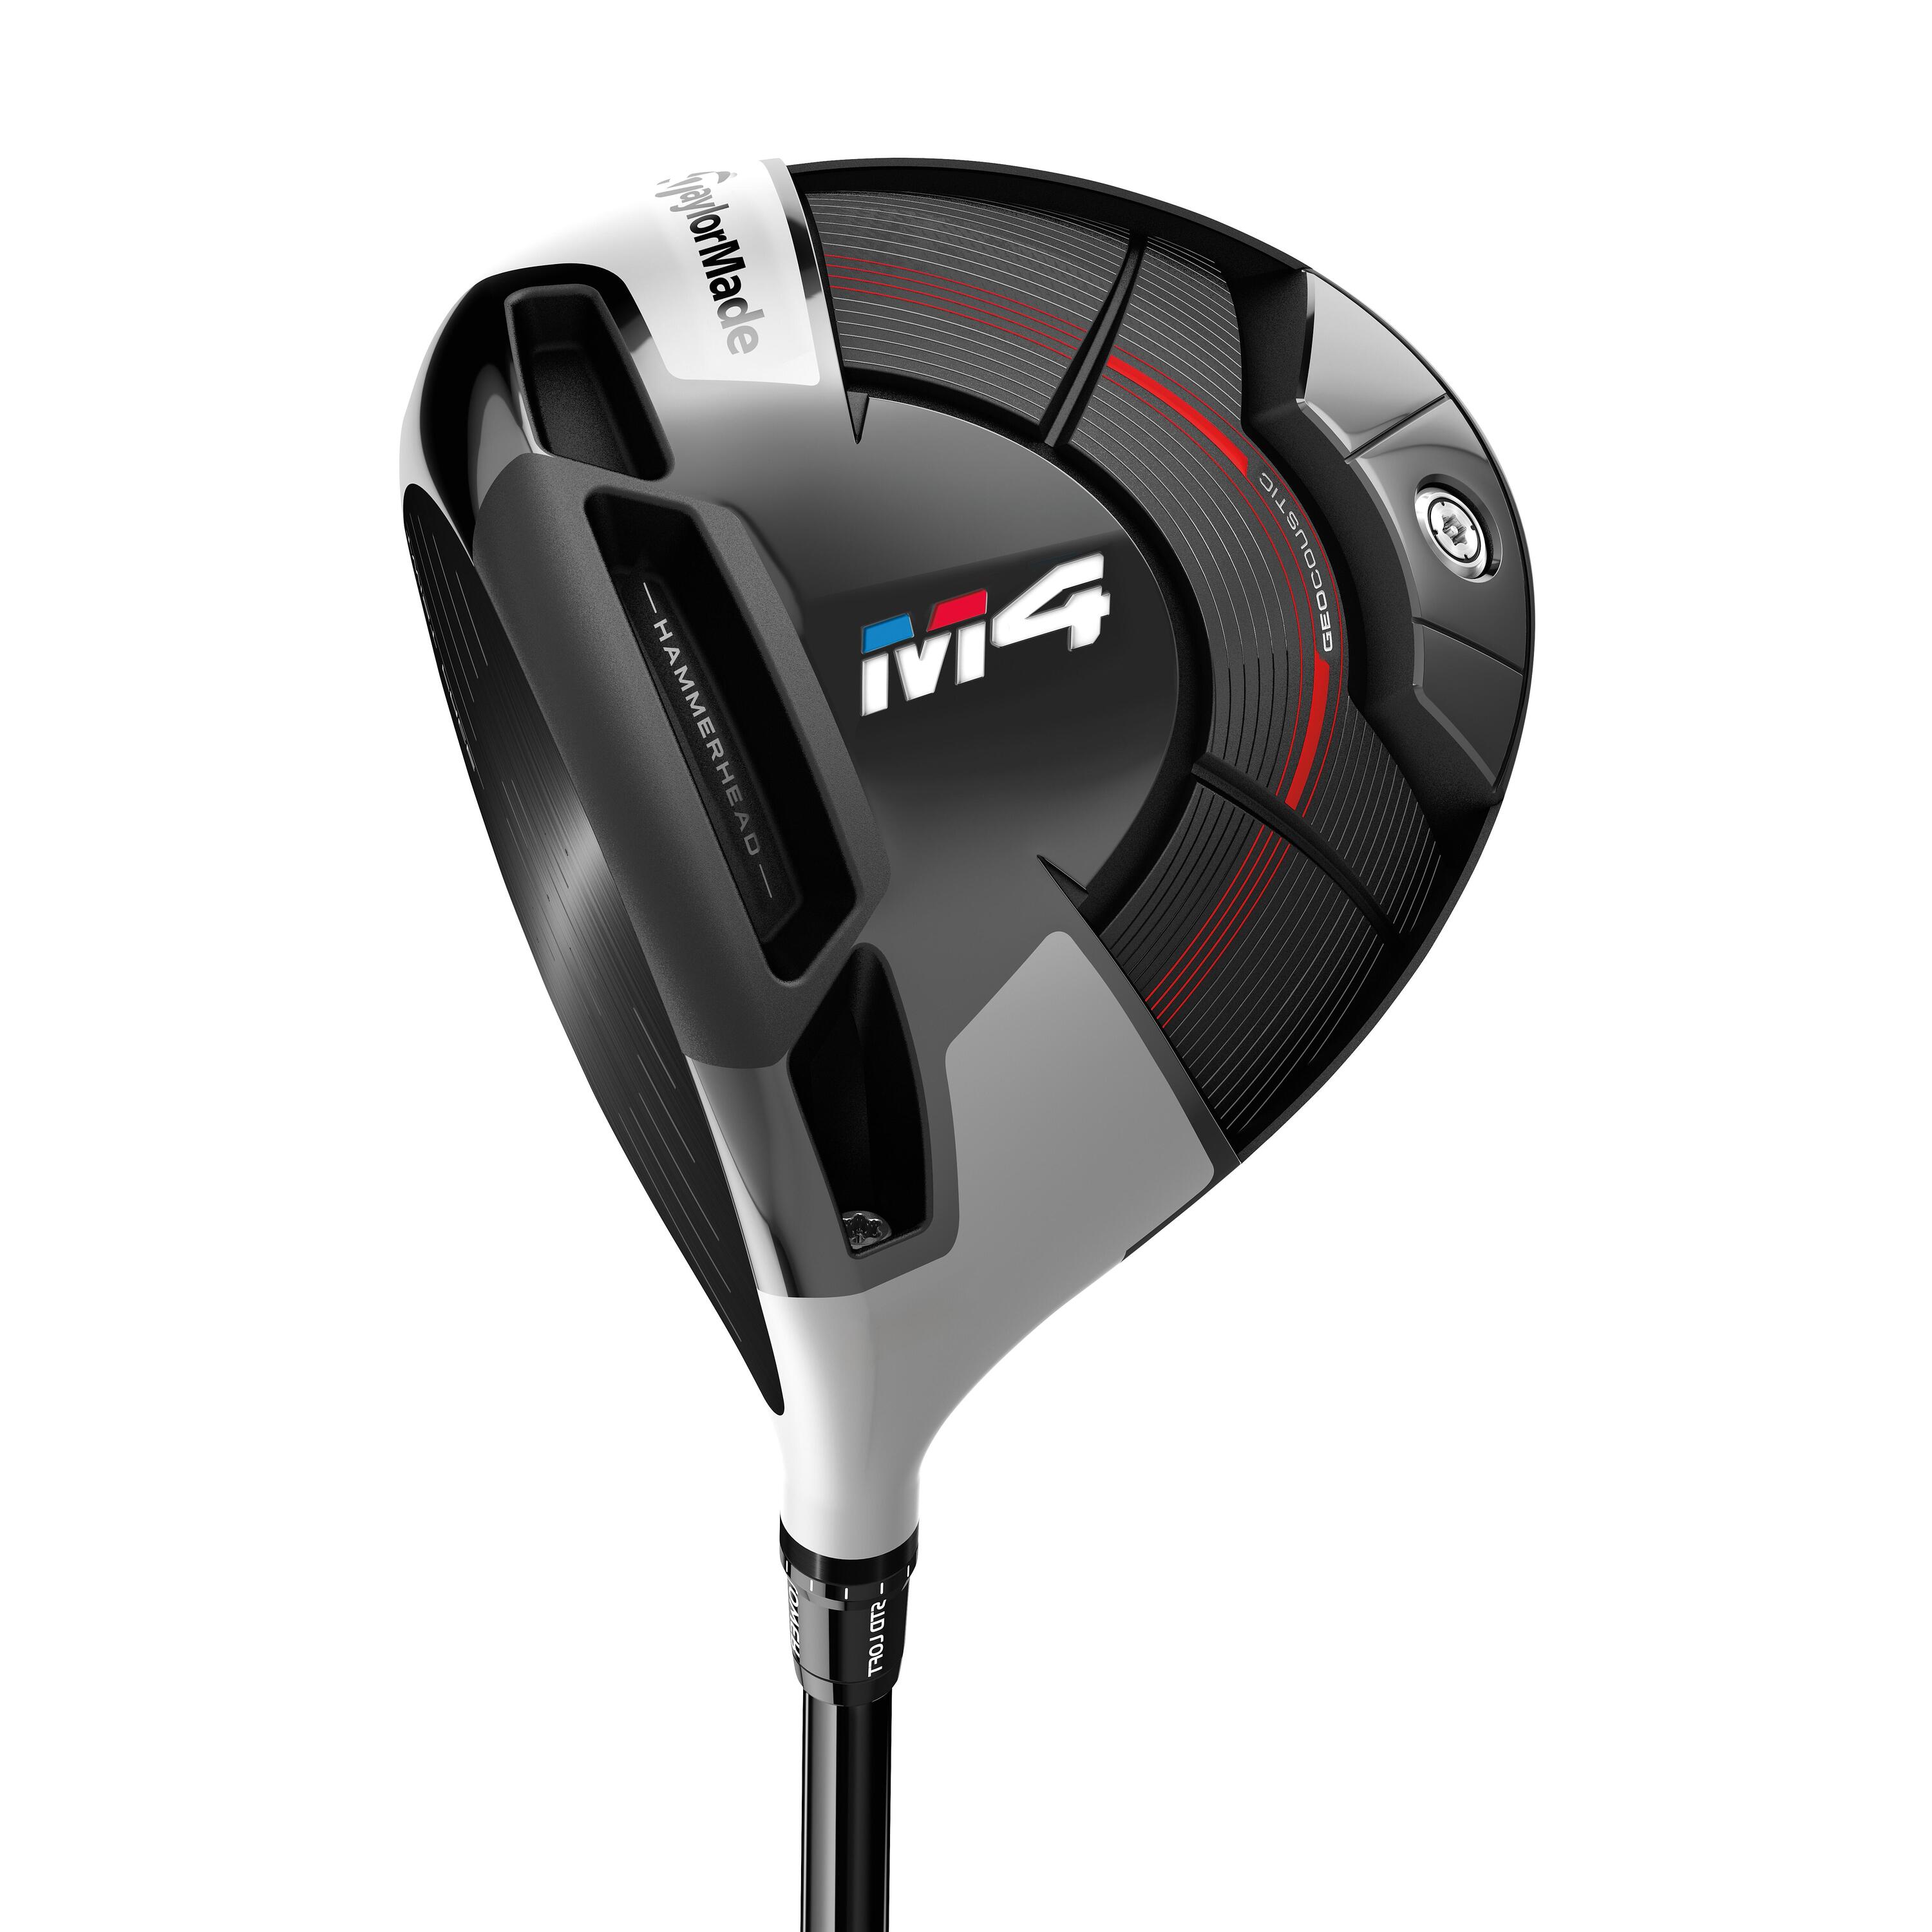 TAYLORMADE GOLF DRIVER 10.5° LEFT HANDED REGULAR - TAYLORMADE M4